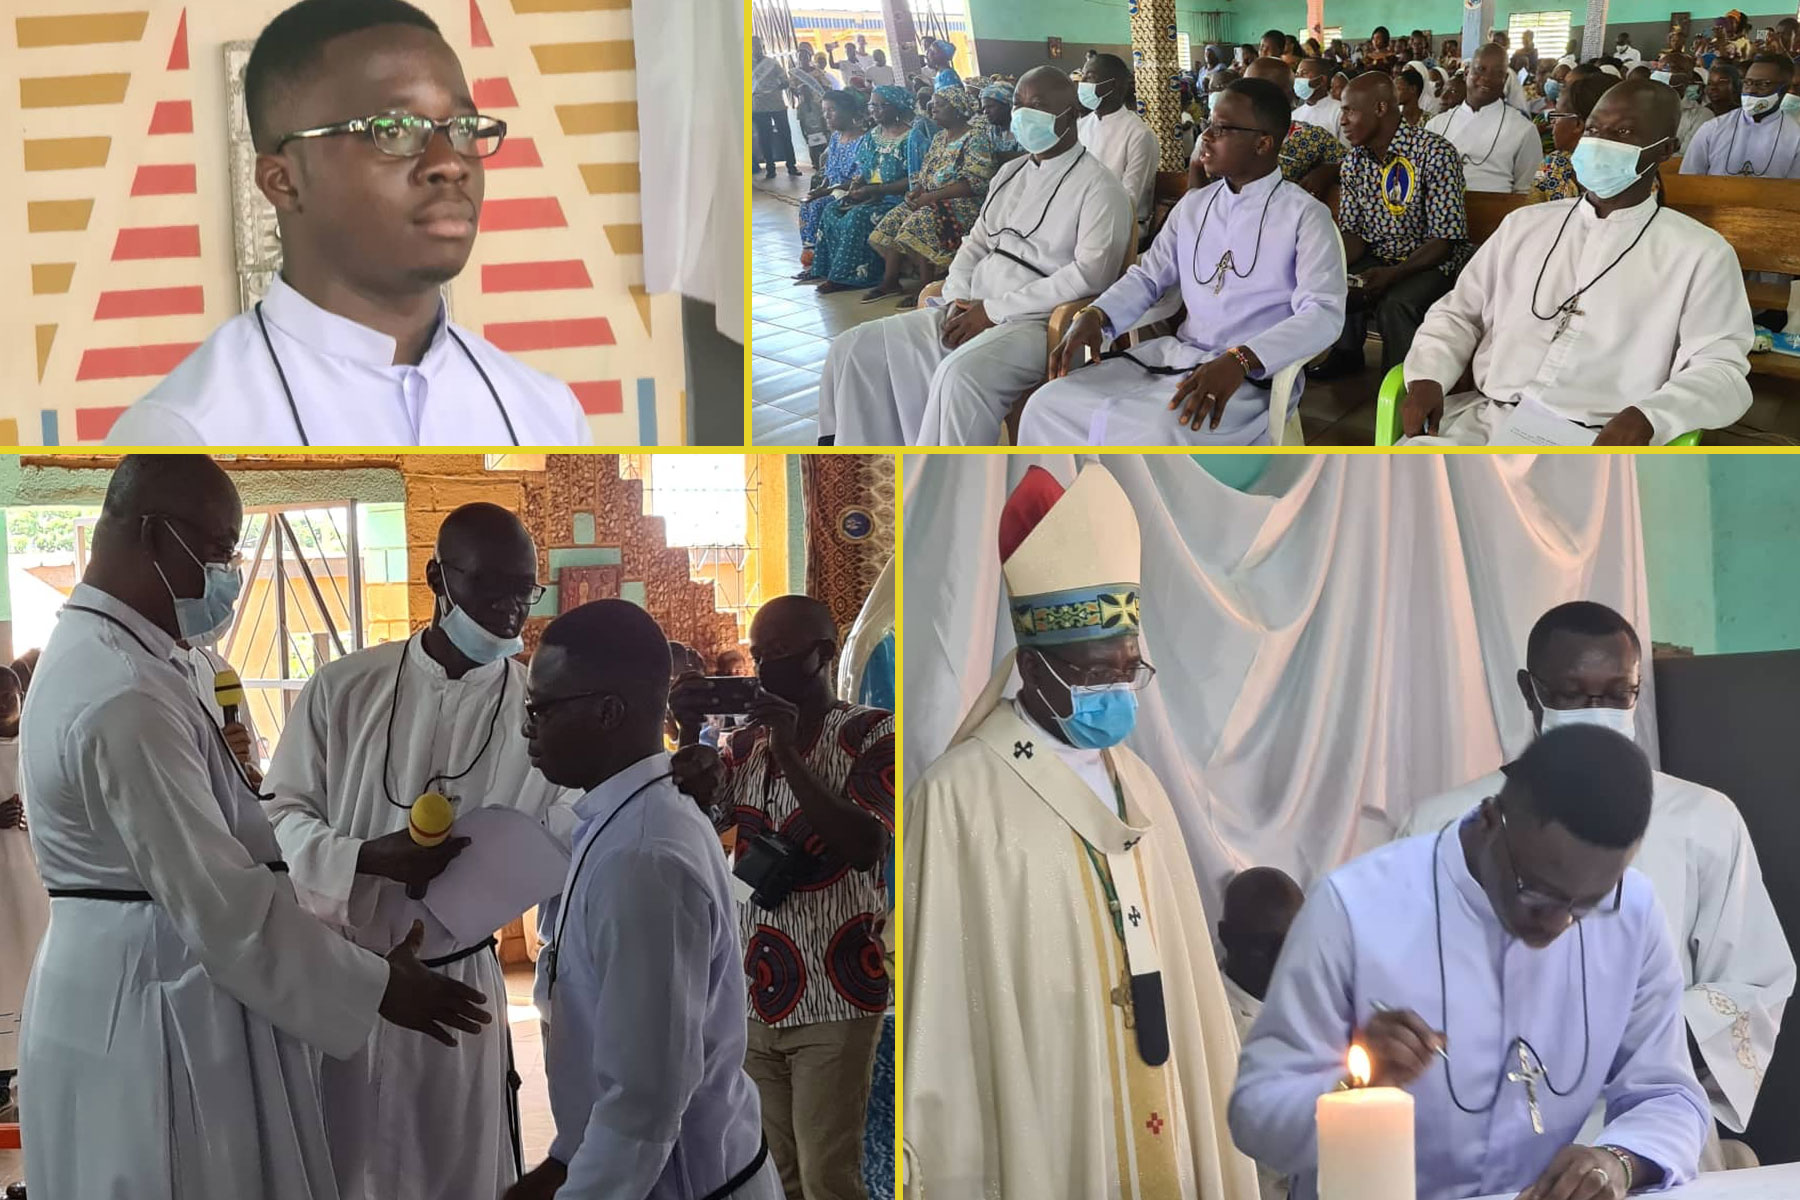 BR. ARISTIDE YAO GHISLAIN in Cote d'Ivoire, Marist Province of West Africa